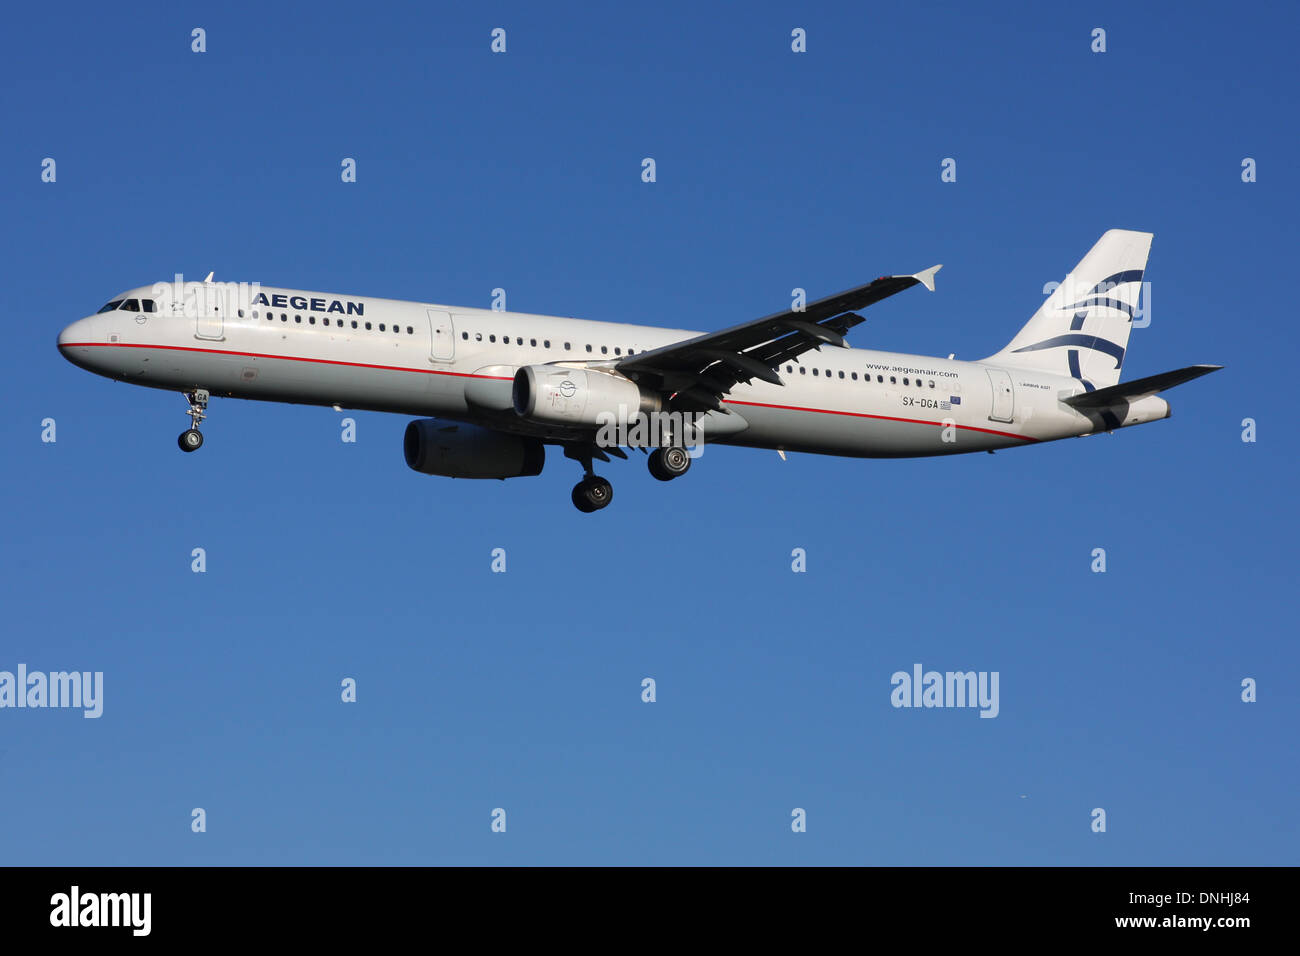 AEGEAN AIRLINES AIRBUS A321 Stock Photo